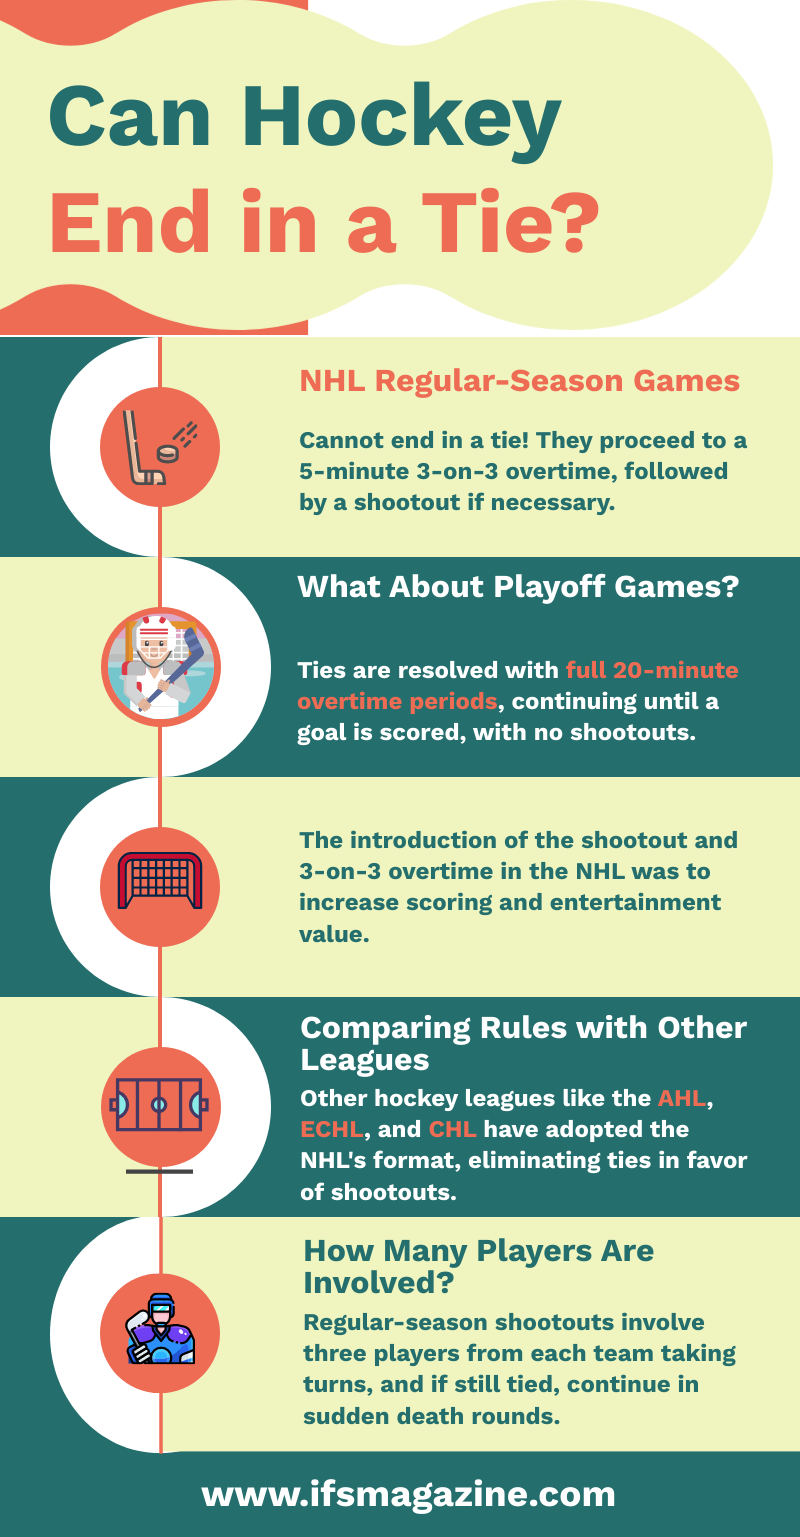 this infographic give information are hockey can end in a tie